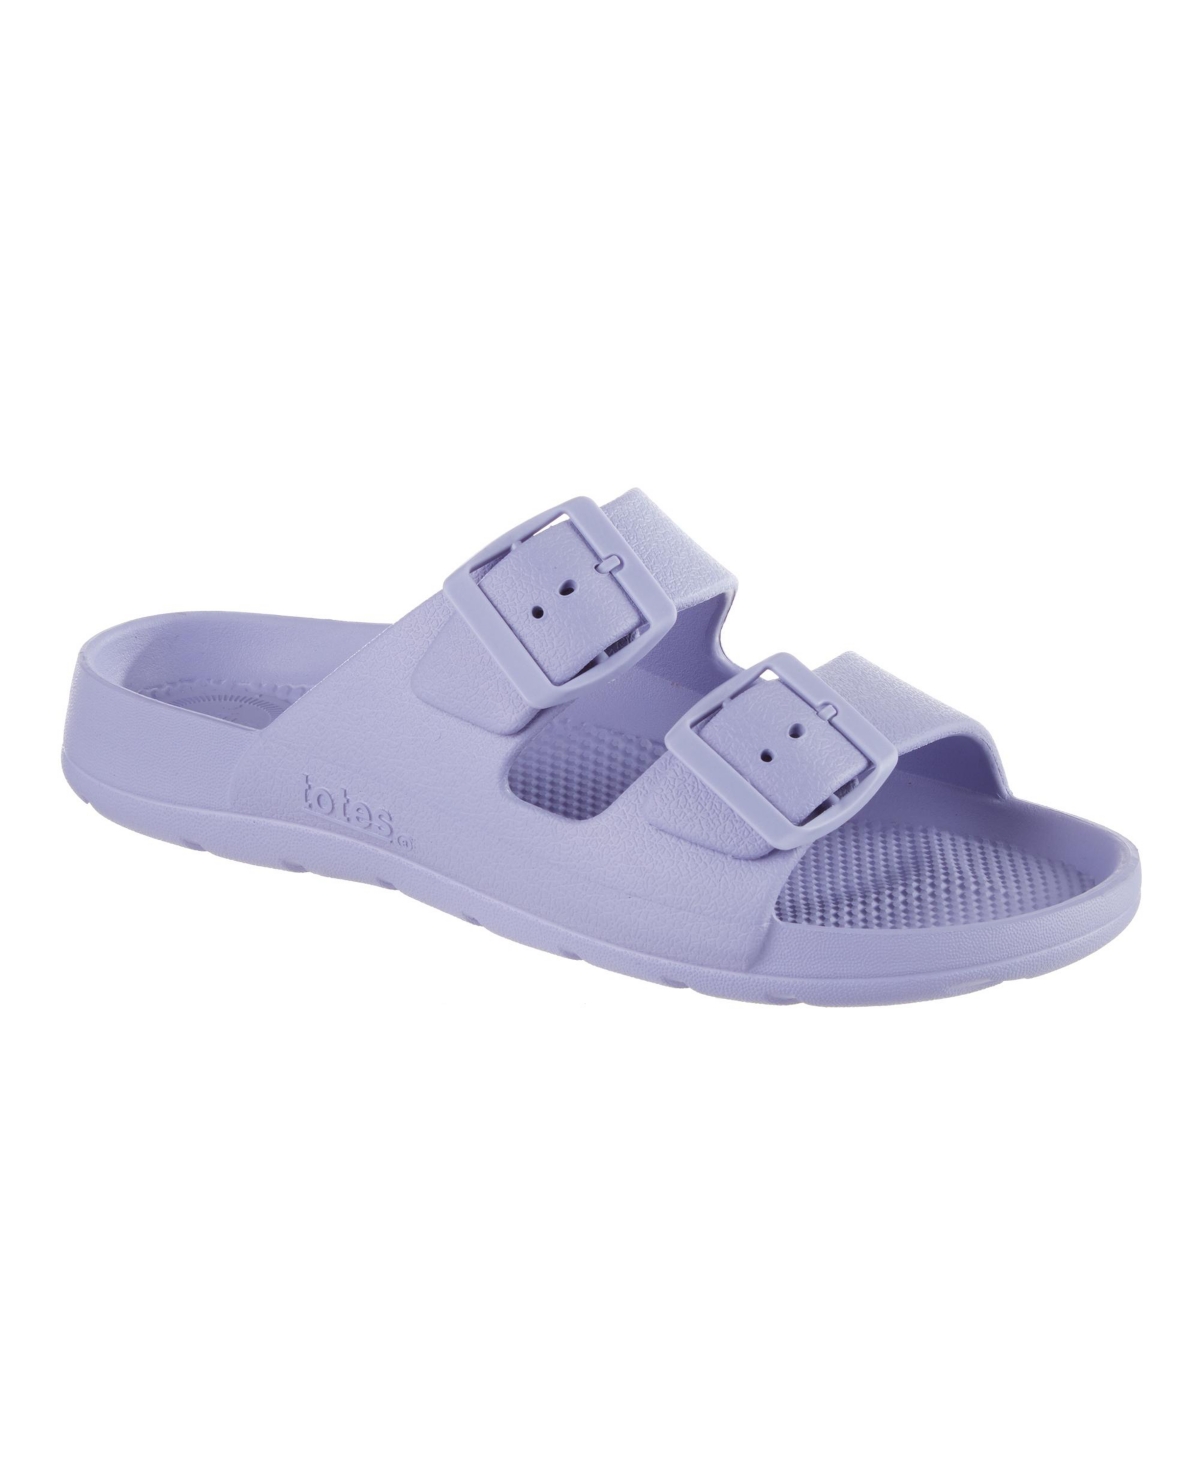 Totes Women's Double Buckle Adjustable Slide With Everywear In Purple